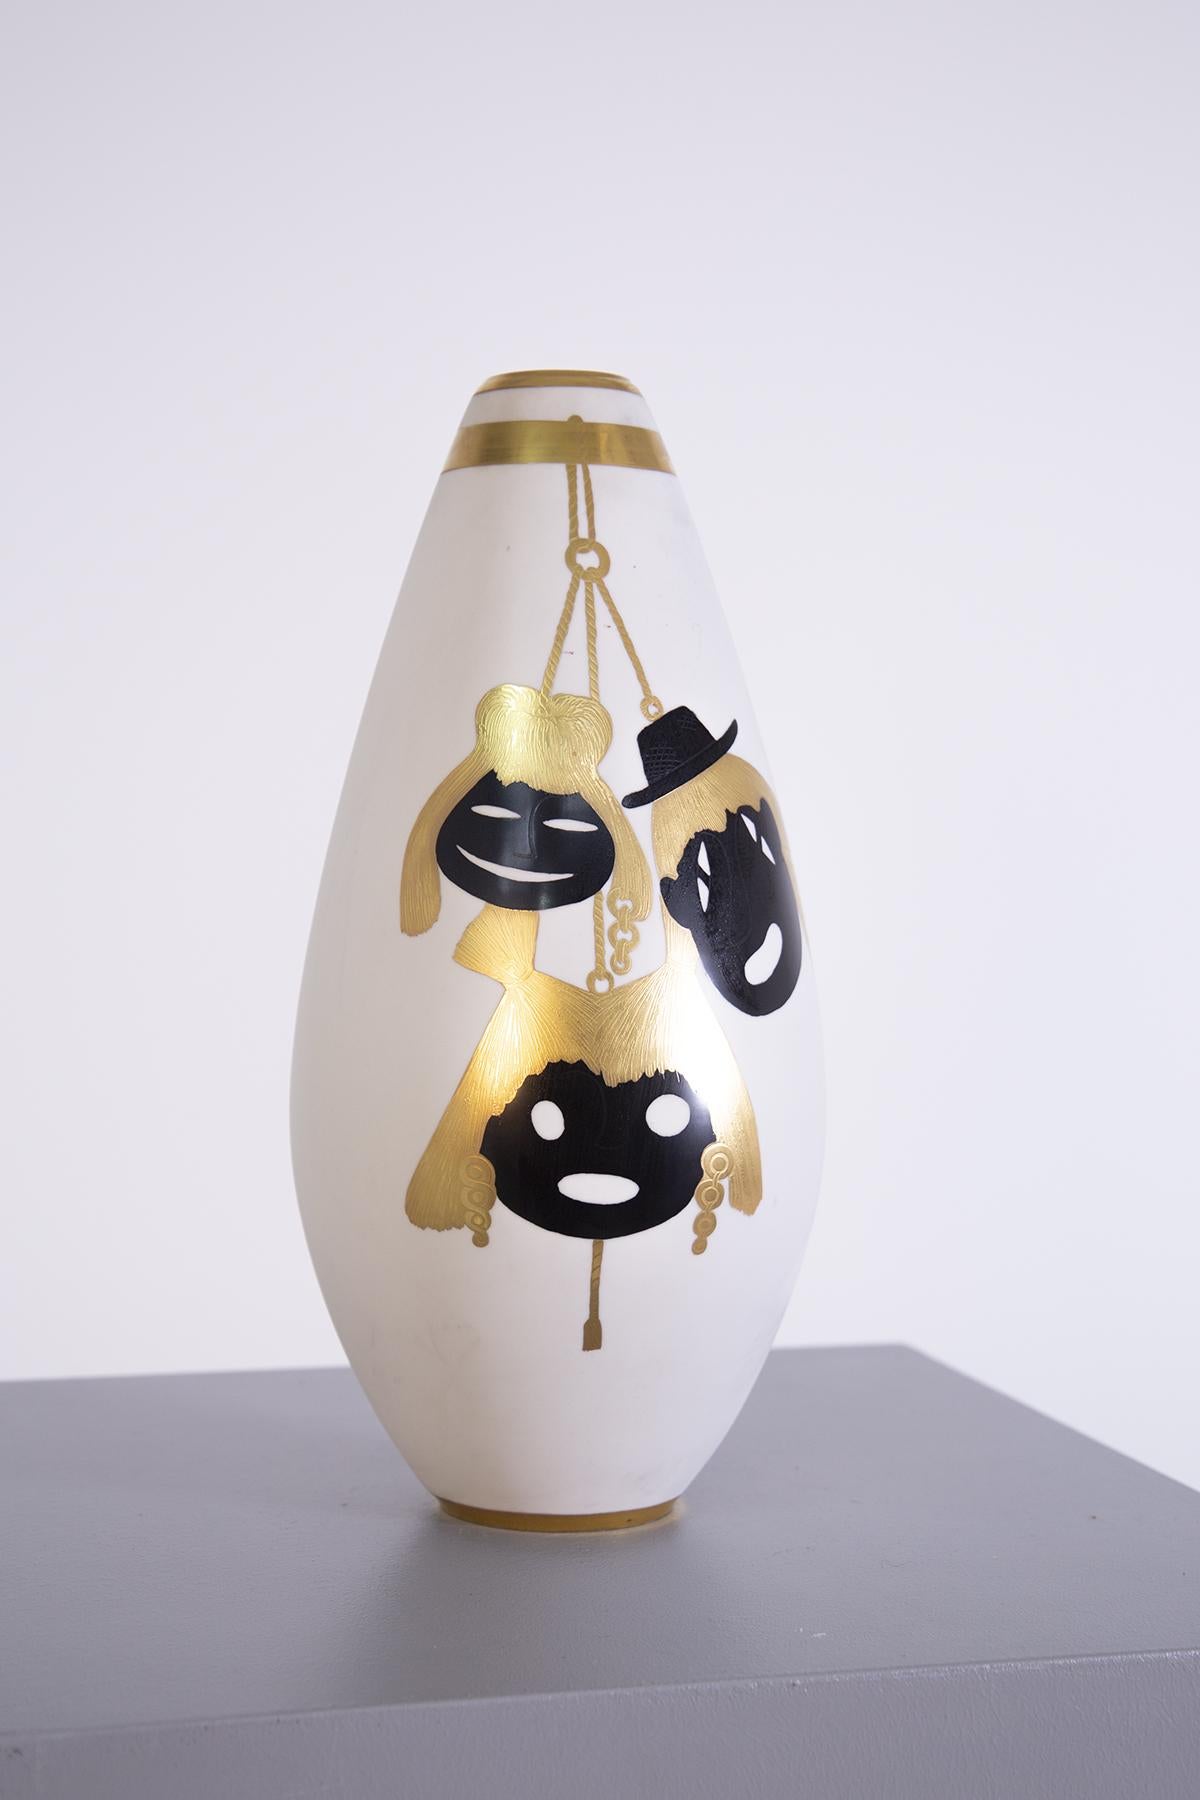 Precious Italian vase from the 1950s made by the great silversmith Arrigio Finzi. The vase has an elliptical shape made in porcelain. Its great particularity are the various elements painted in pure gold. Glie elements depicted are carnival masks